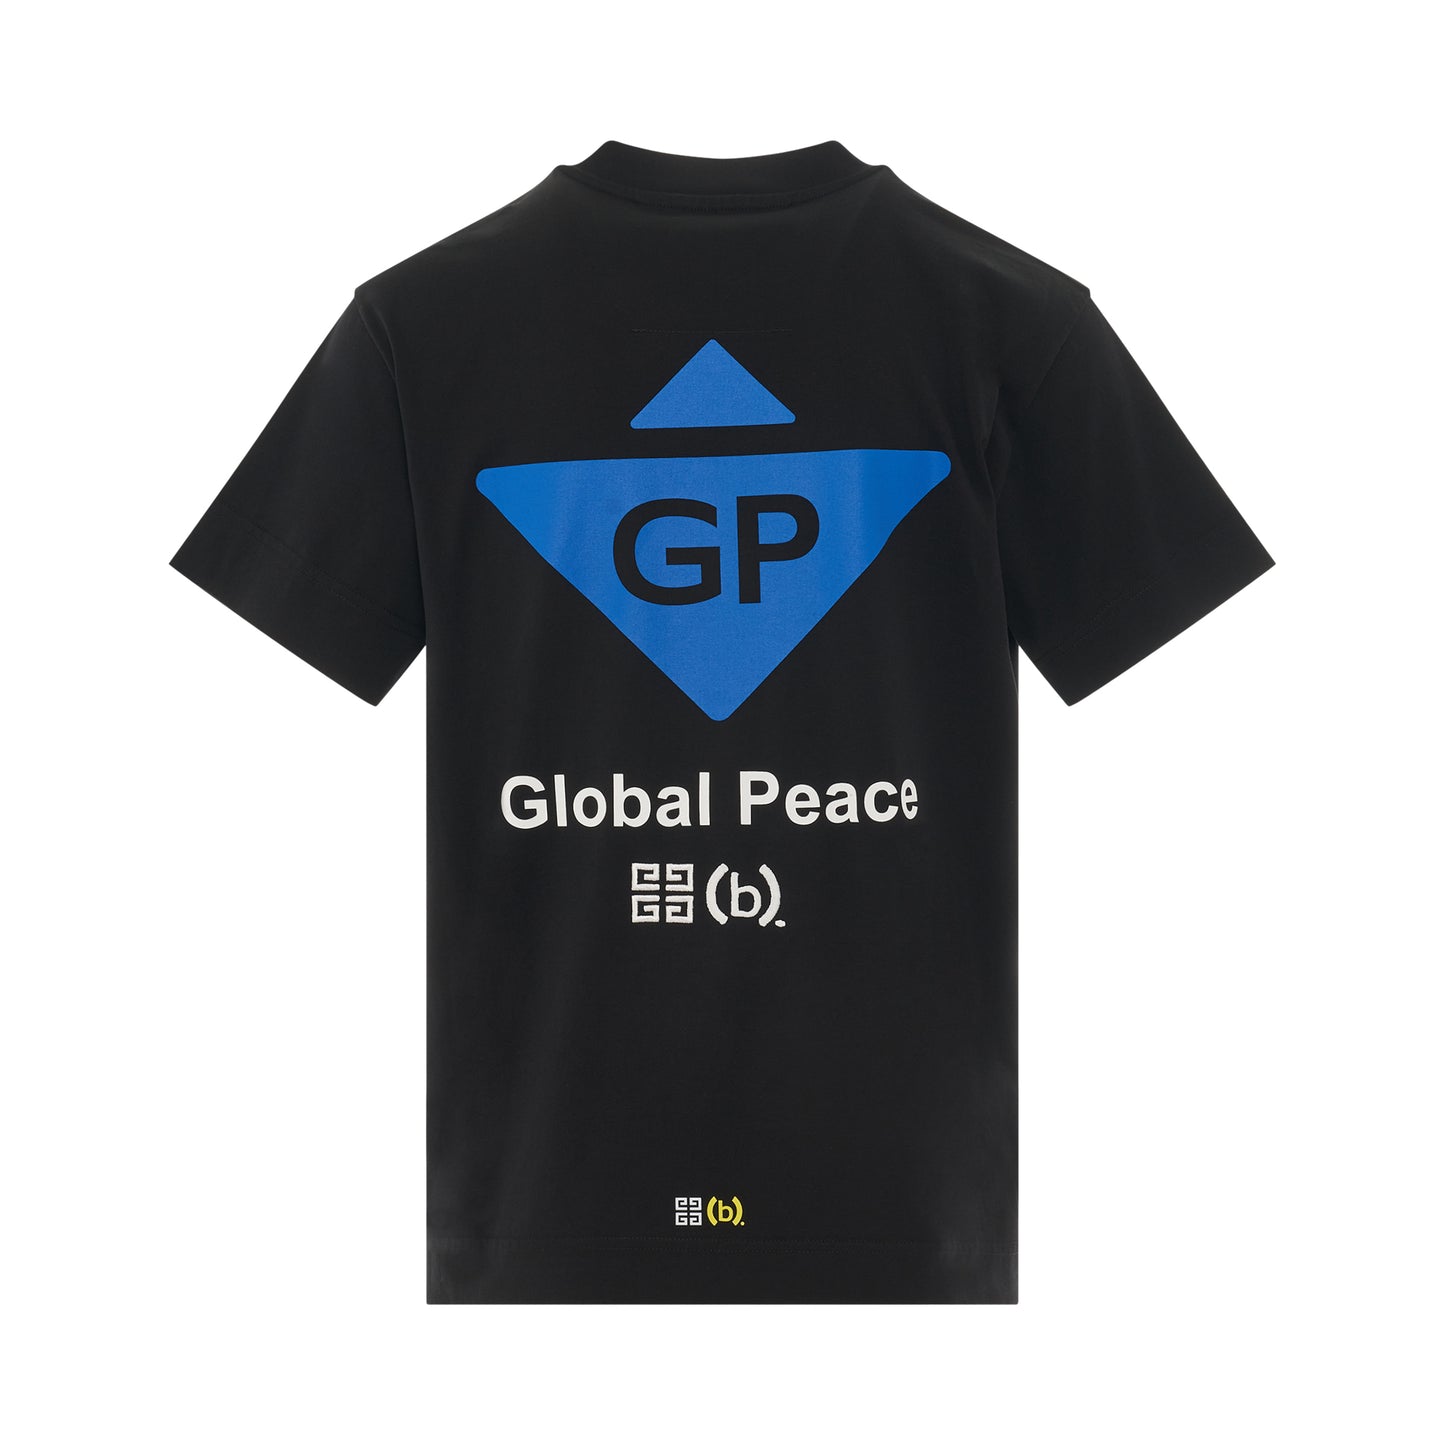 BSTROY Global Peace T-Shirt in Black